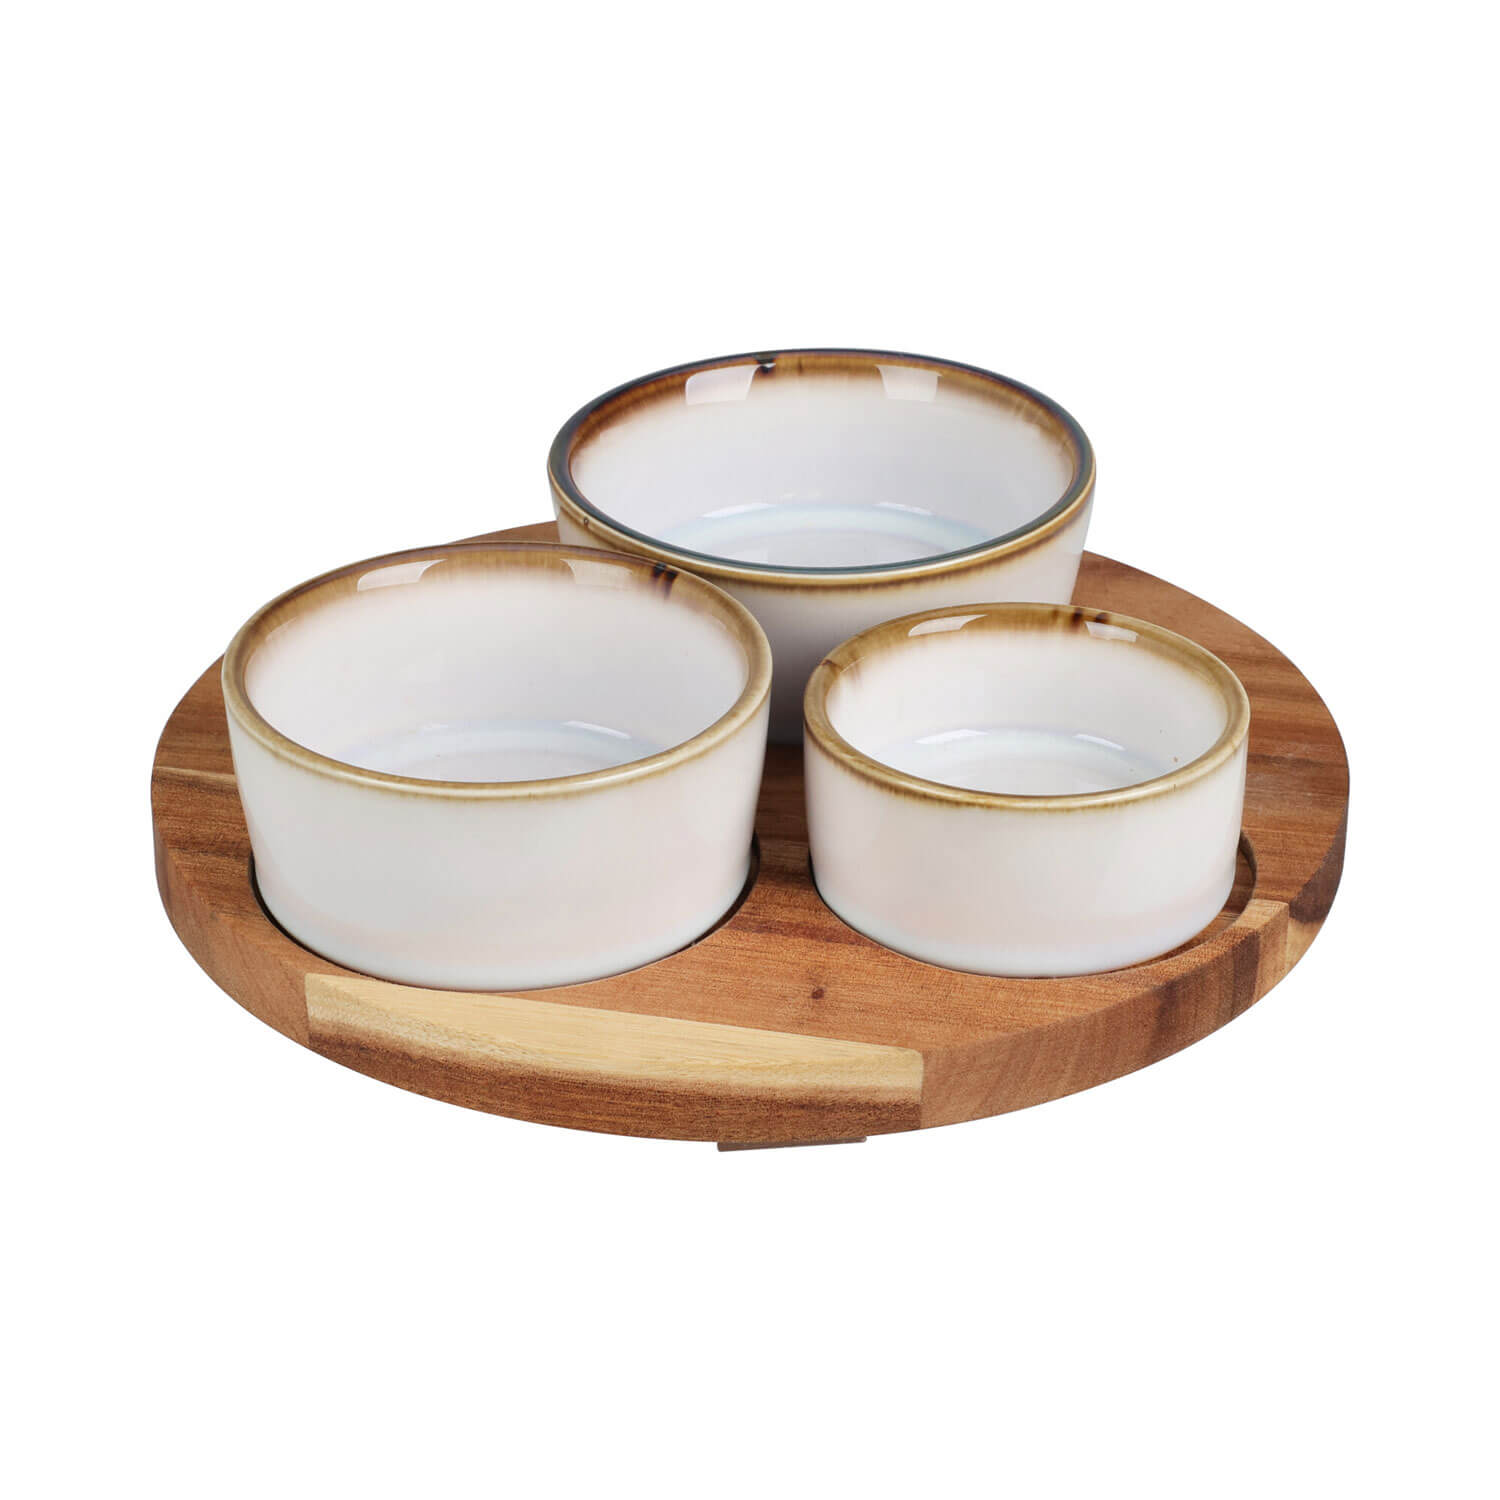 The Home Set of 3 Bowls on Serving Dish 1 Shaws Department Stores